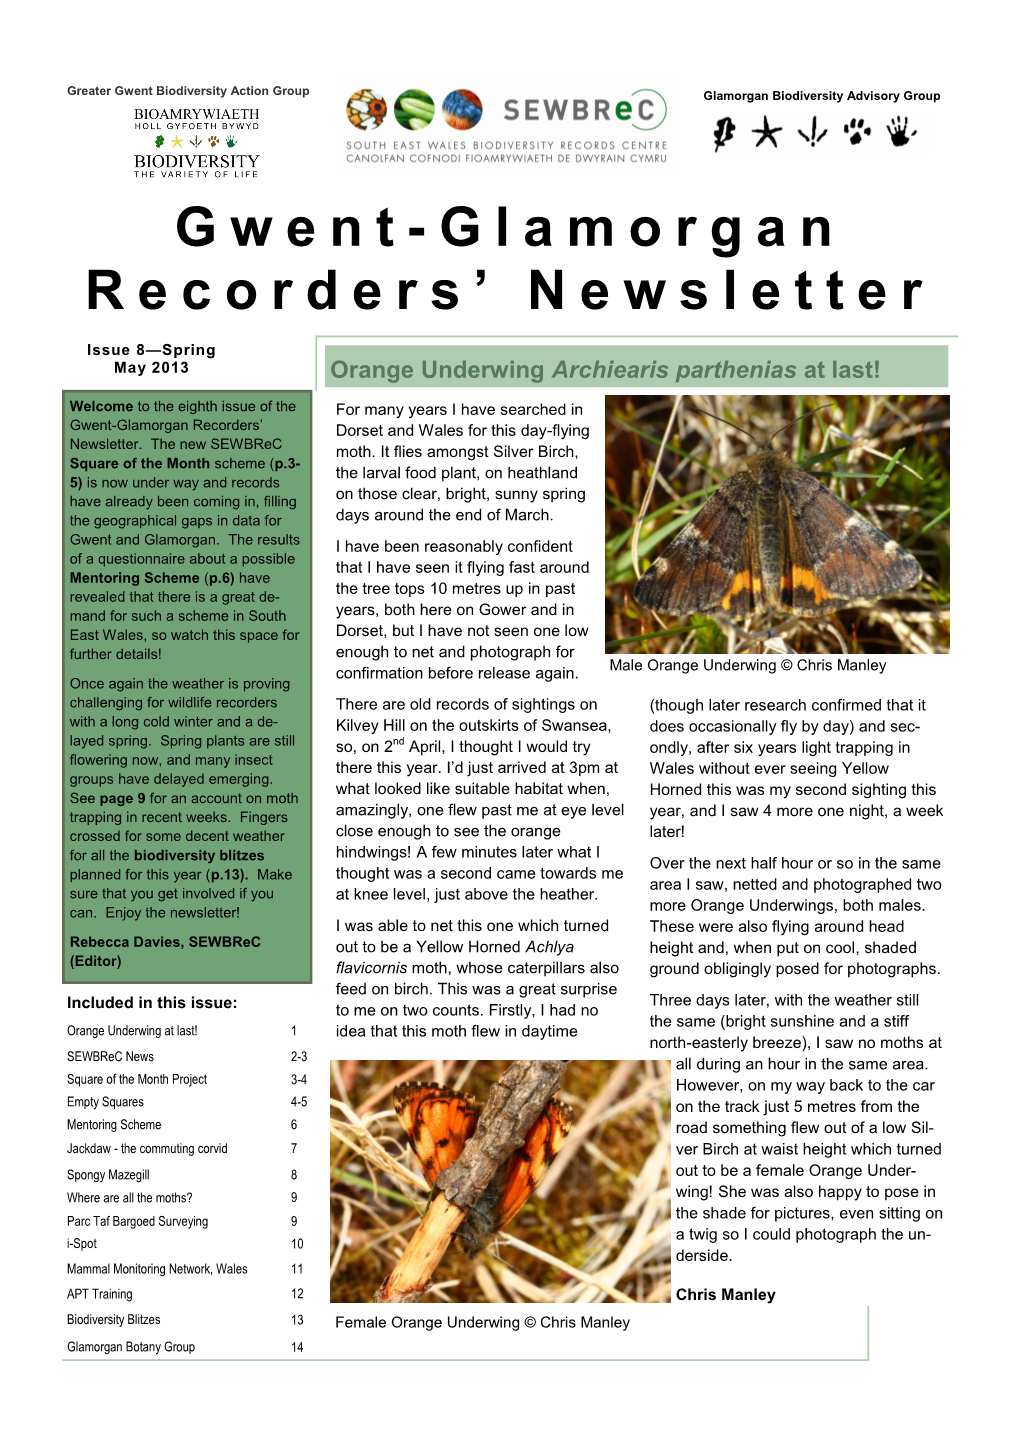 Gwent-Glamorgan Recorders' Newsletter Issue 8